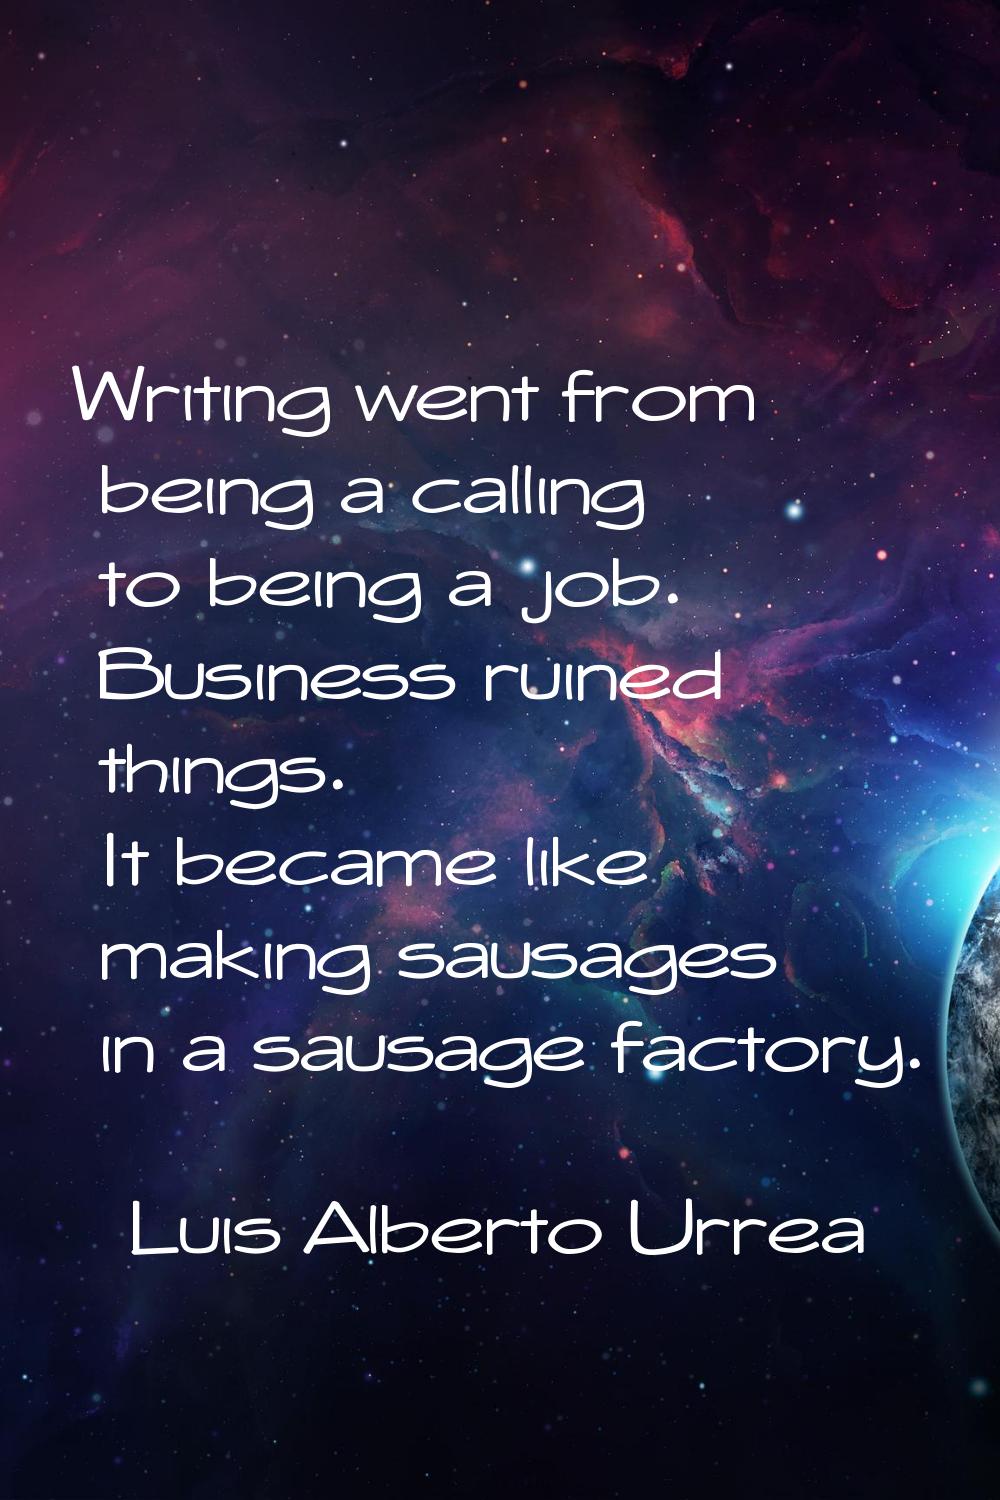 Writing went from being a calling to being a job. Business ruined things. It became like making sau